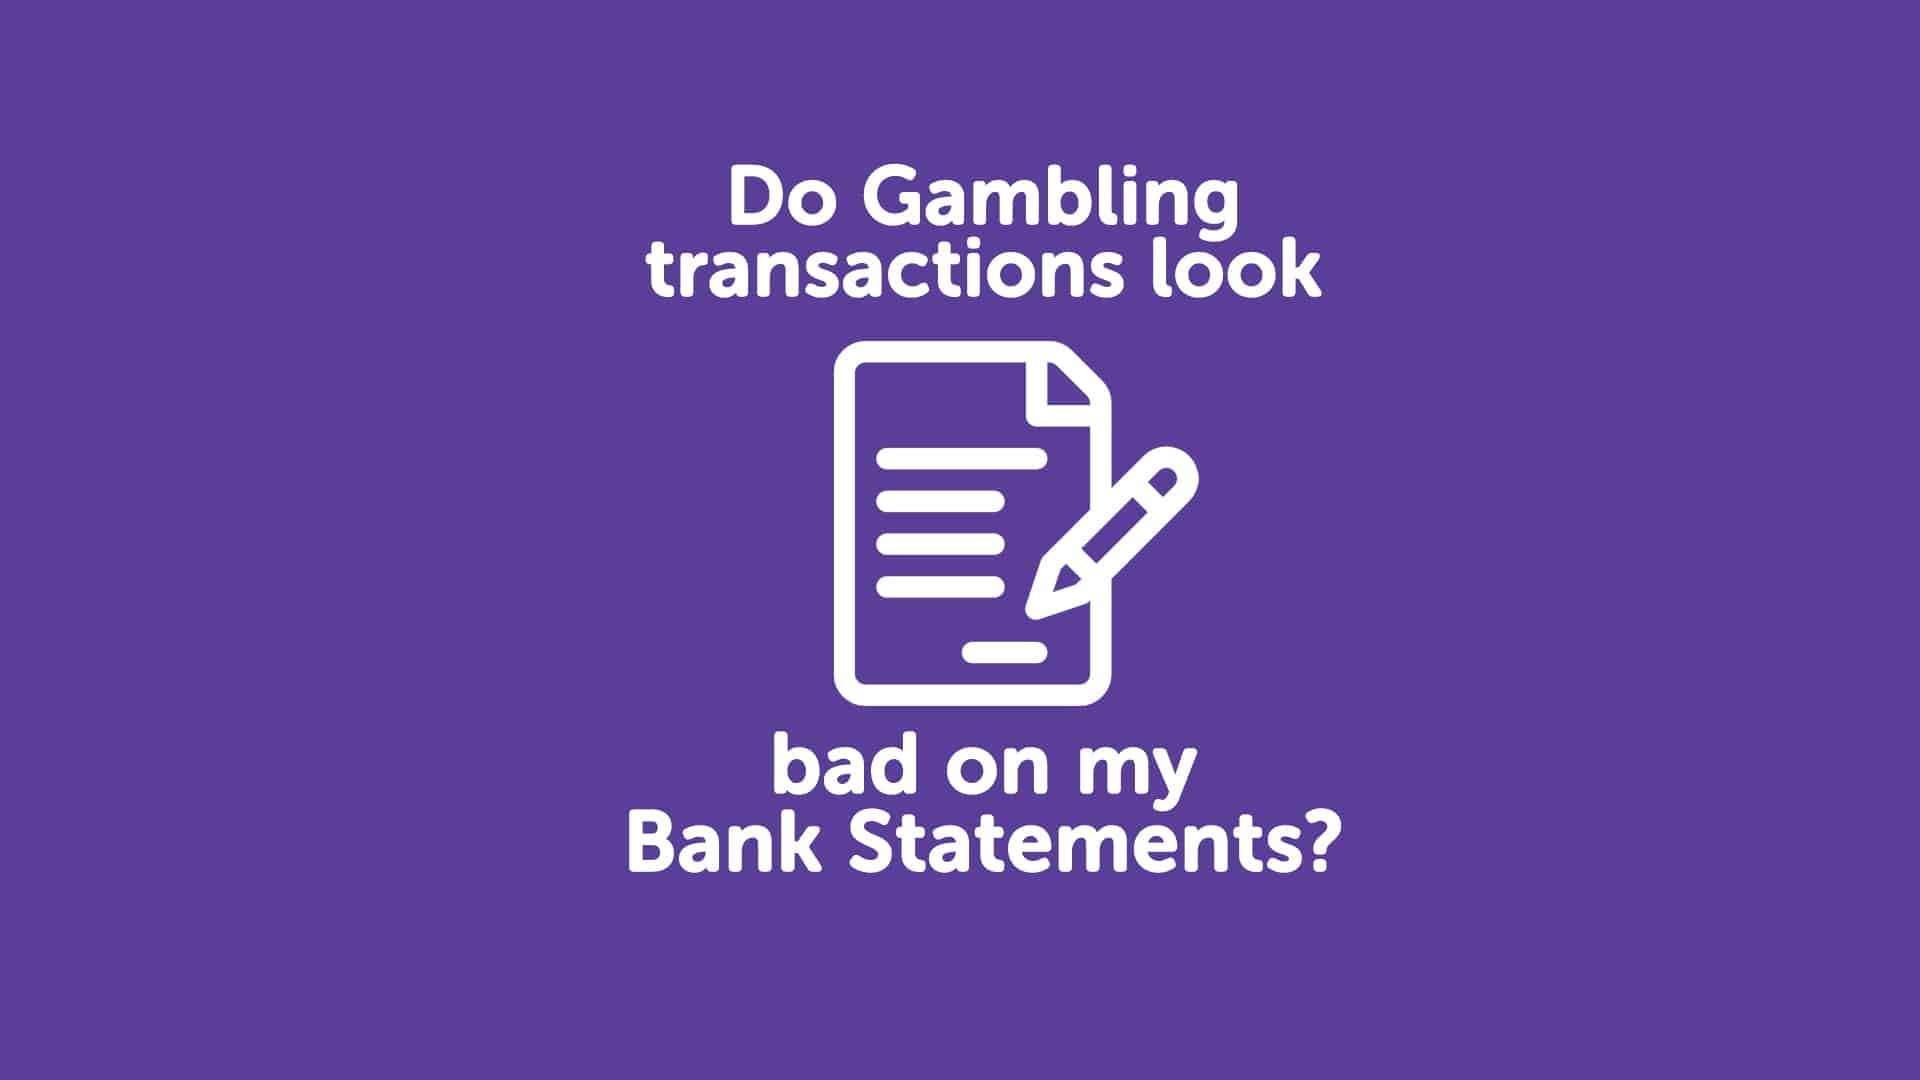 Do Gambling Transactions Look Bad on My Bank Statements in Bristol?